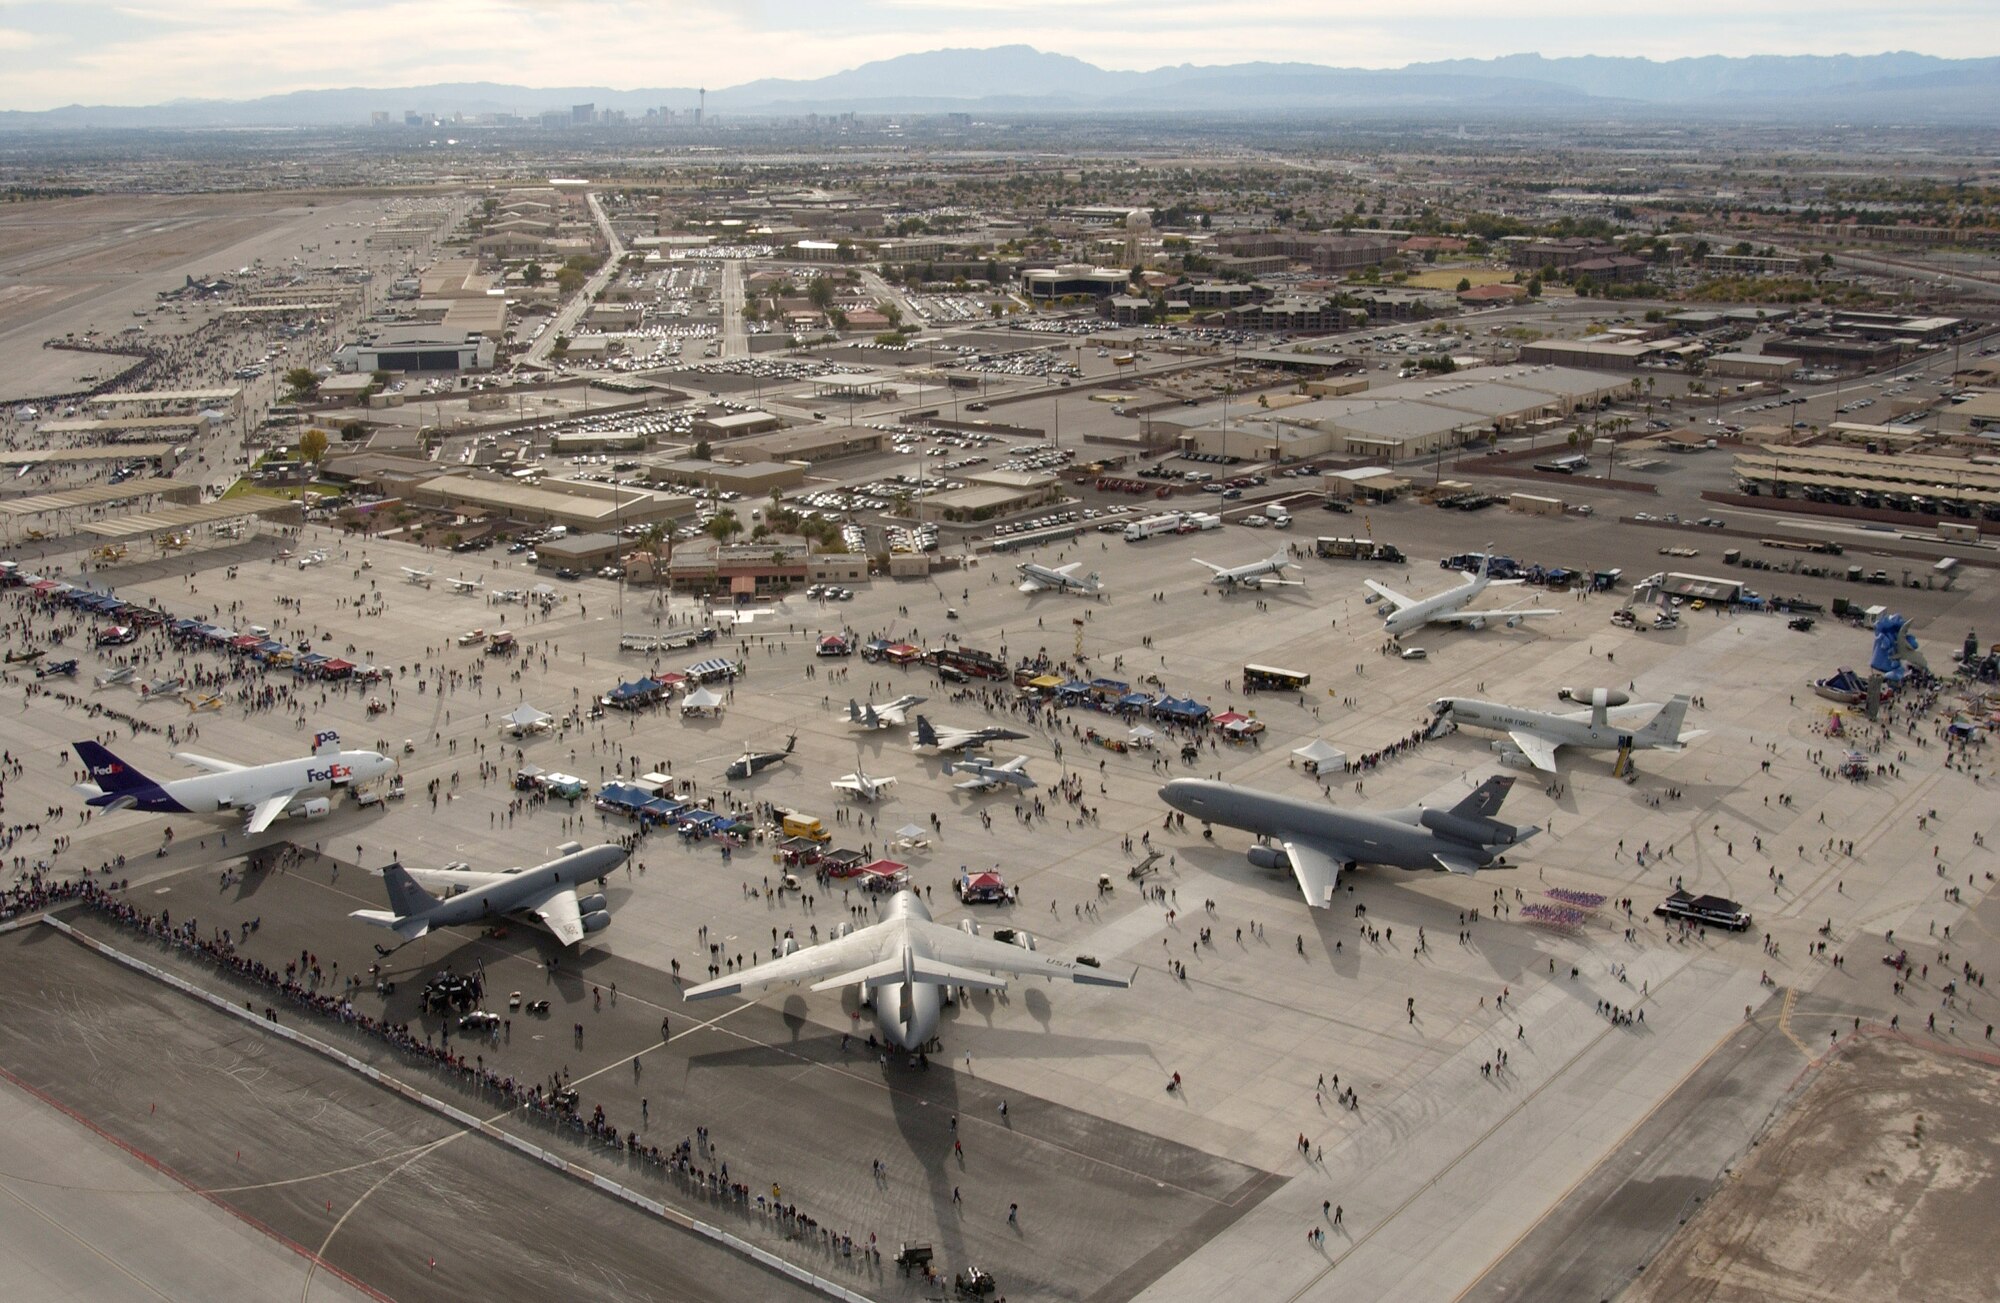 An aerial view of the flightline shows the city of Las Vegas in the distance during Aviation Nation 2006 Nov. 12 at Nellis Air Force Base, Nev. It is one of the largest aviation events in North America. The show was held Nov. 11 and 12. (U.S. Air Force photo/Master Sgt. Kevin J. Gruenwald)